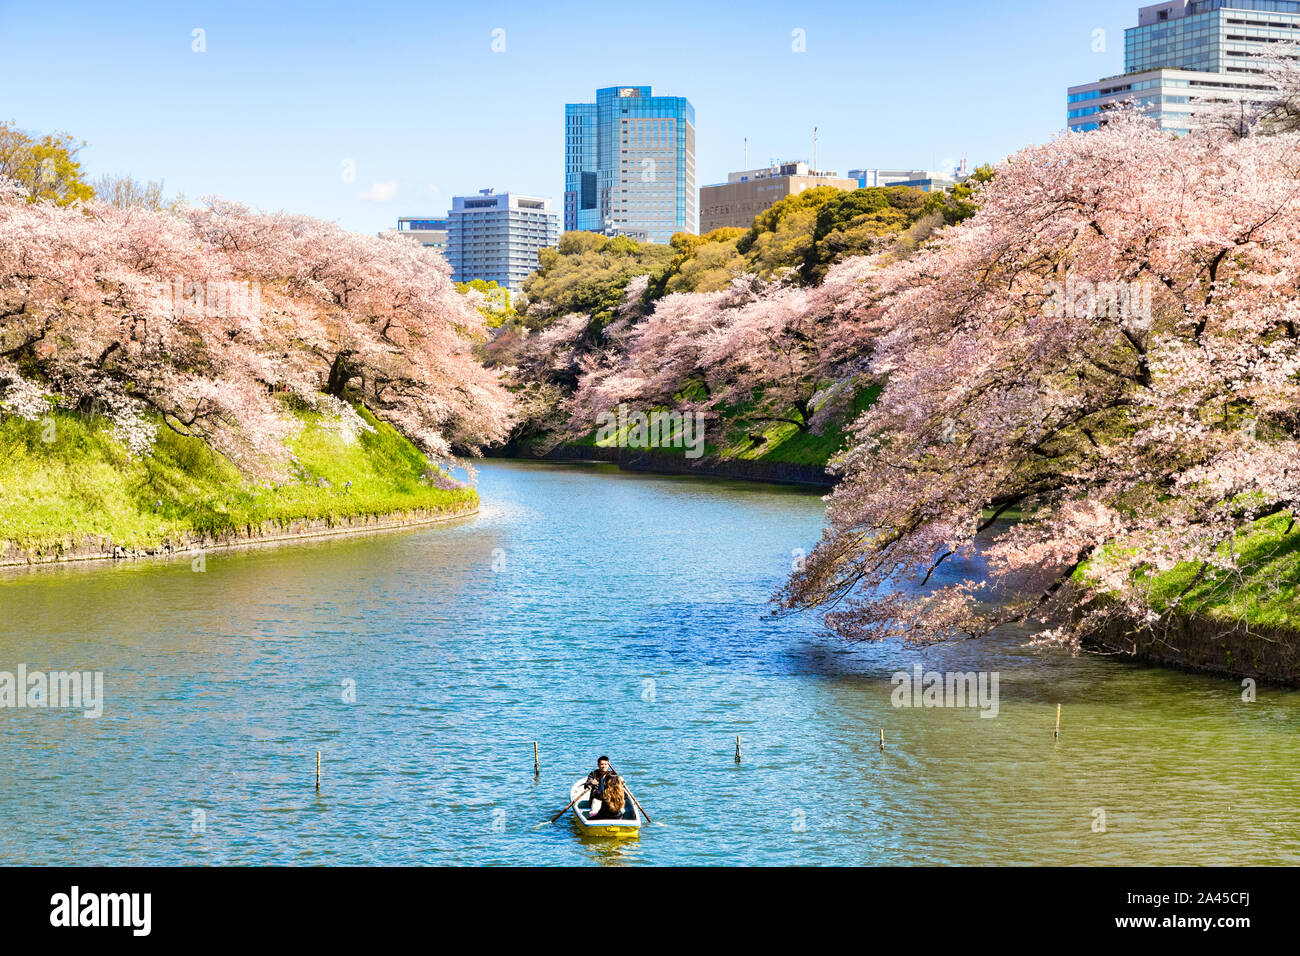 9 April 2019: Tokyo, Japan - Cherry Blossom lining the banks oif the Imperial Moat, and one boat with young couple rowing. Stock Photo